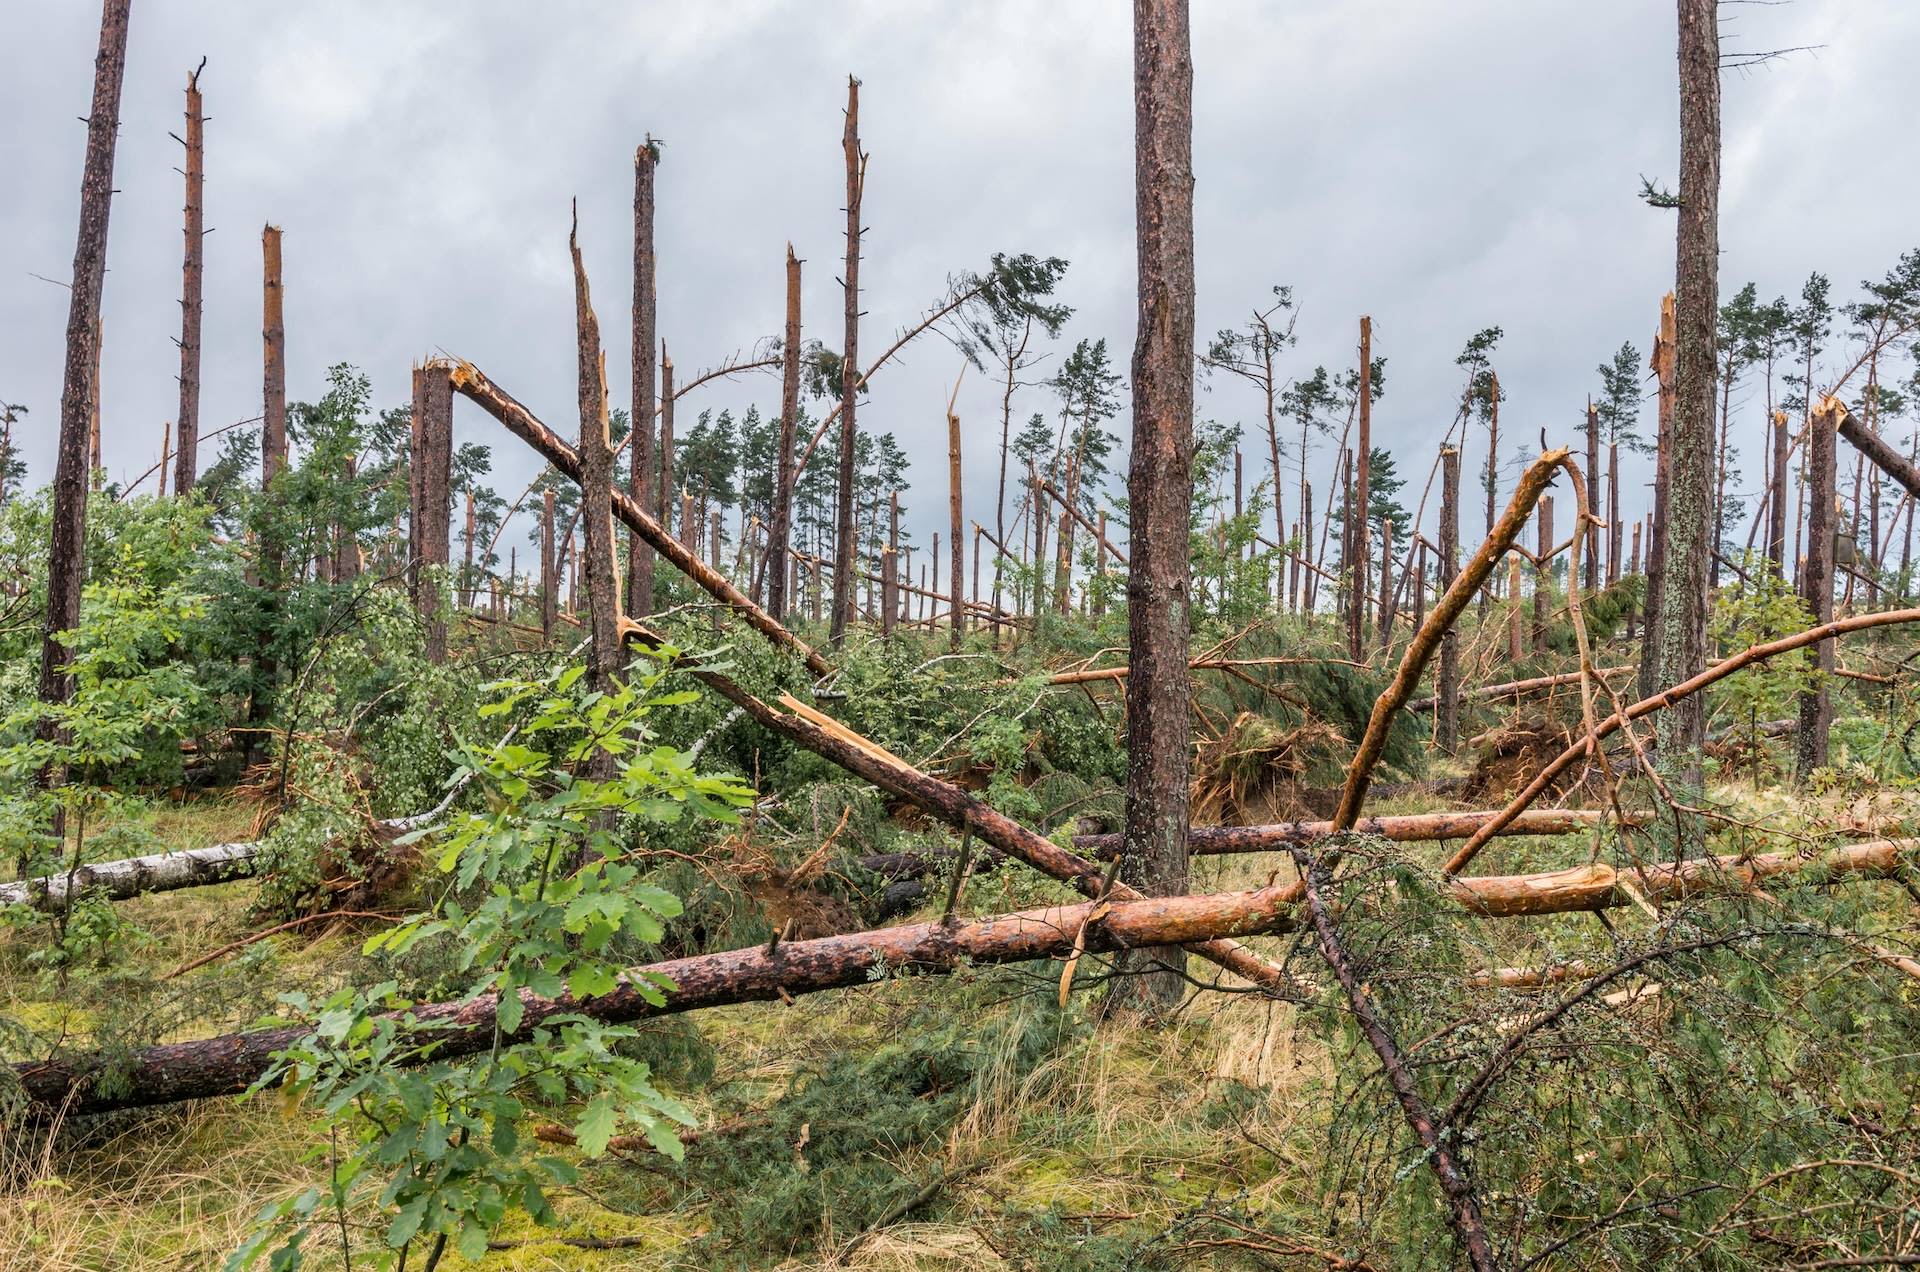 New study reveals devastating impact single hurricane could have on forested regions: 'We have to adequately account for the risks'